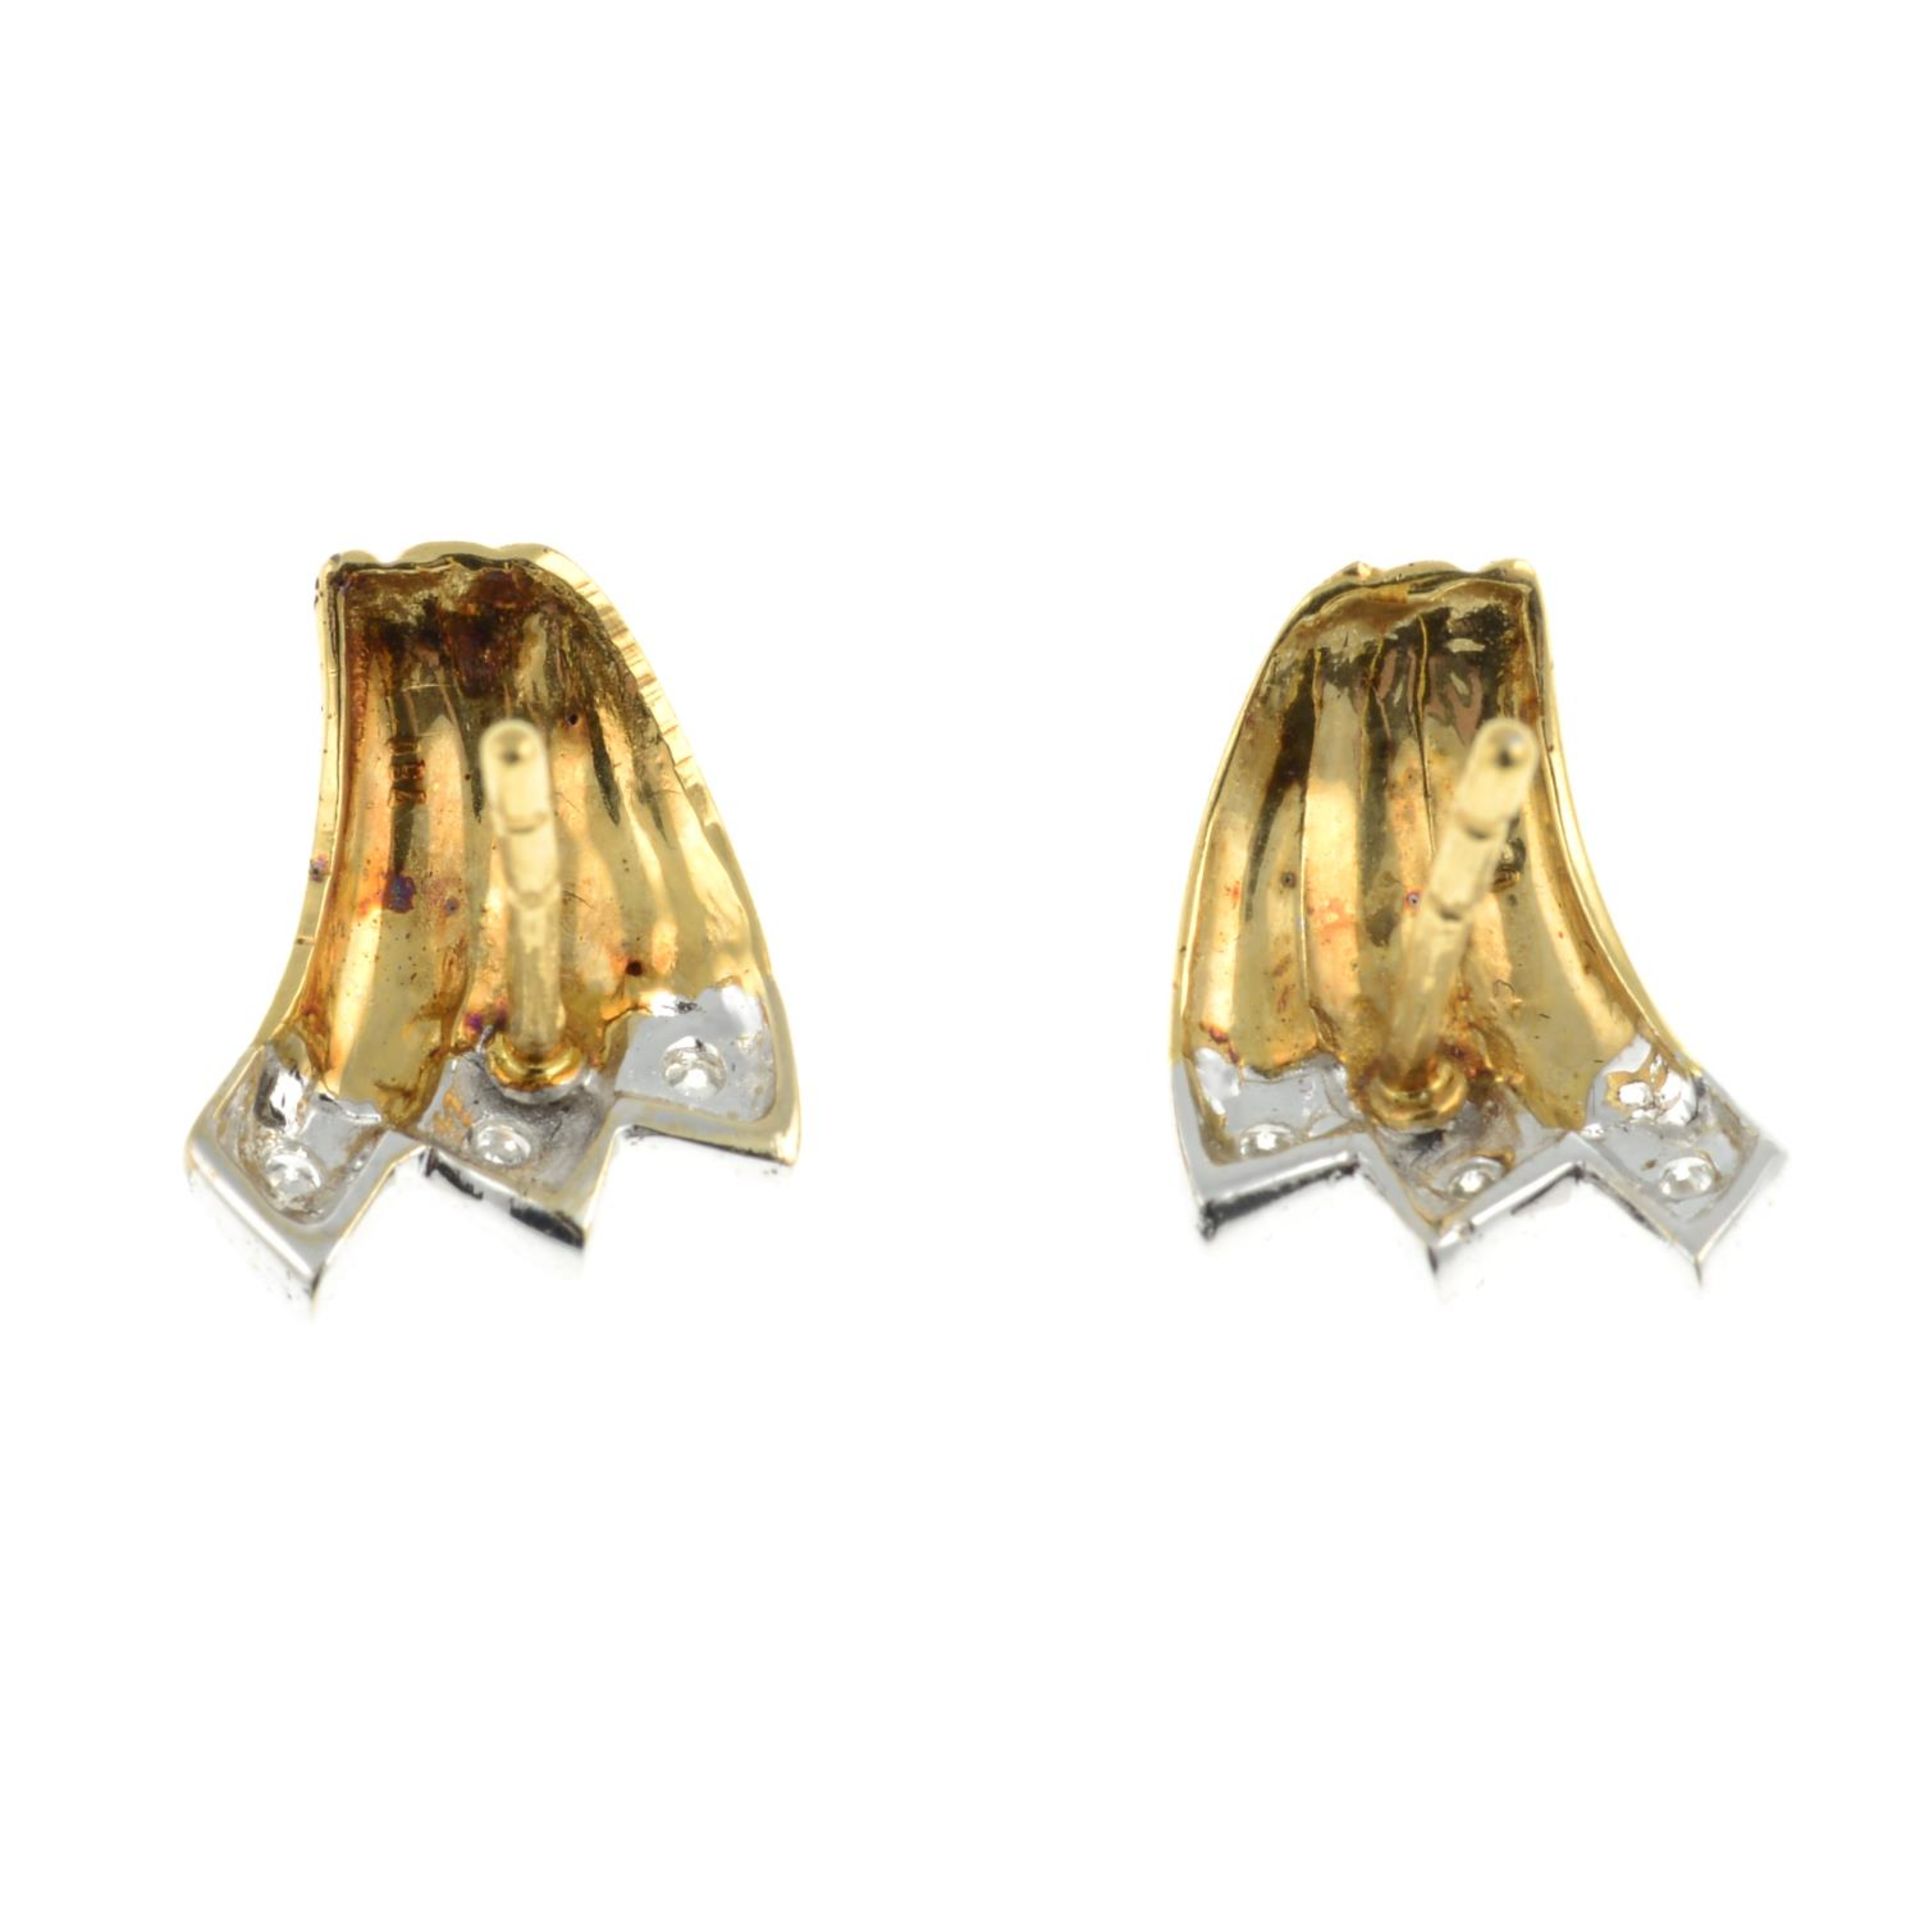 A pair of 18ct gold earrings, with diamond accents.Import marks for 18ct gold. - Image 2 of 2